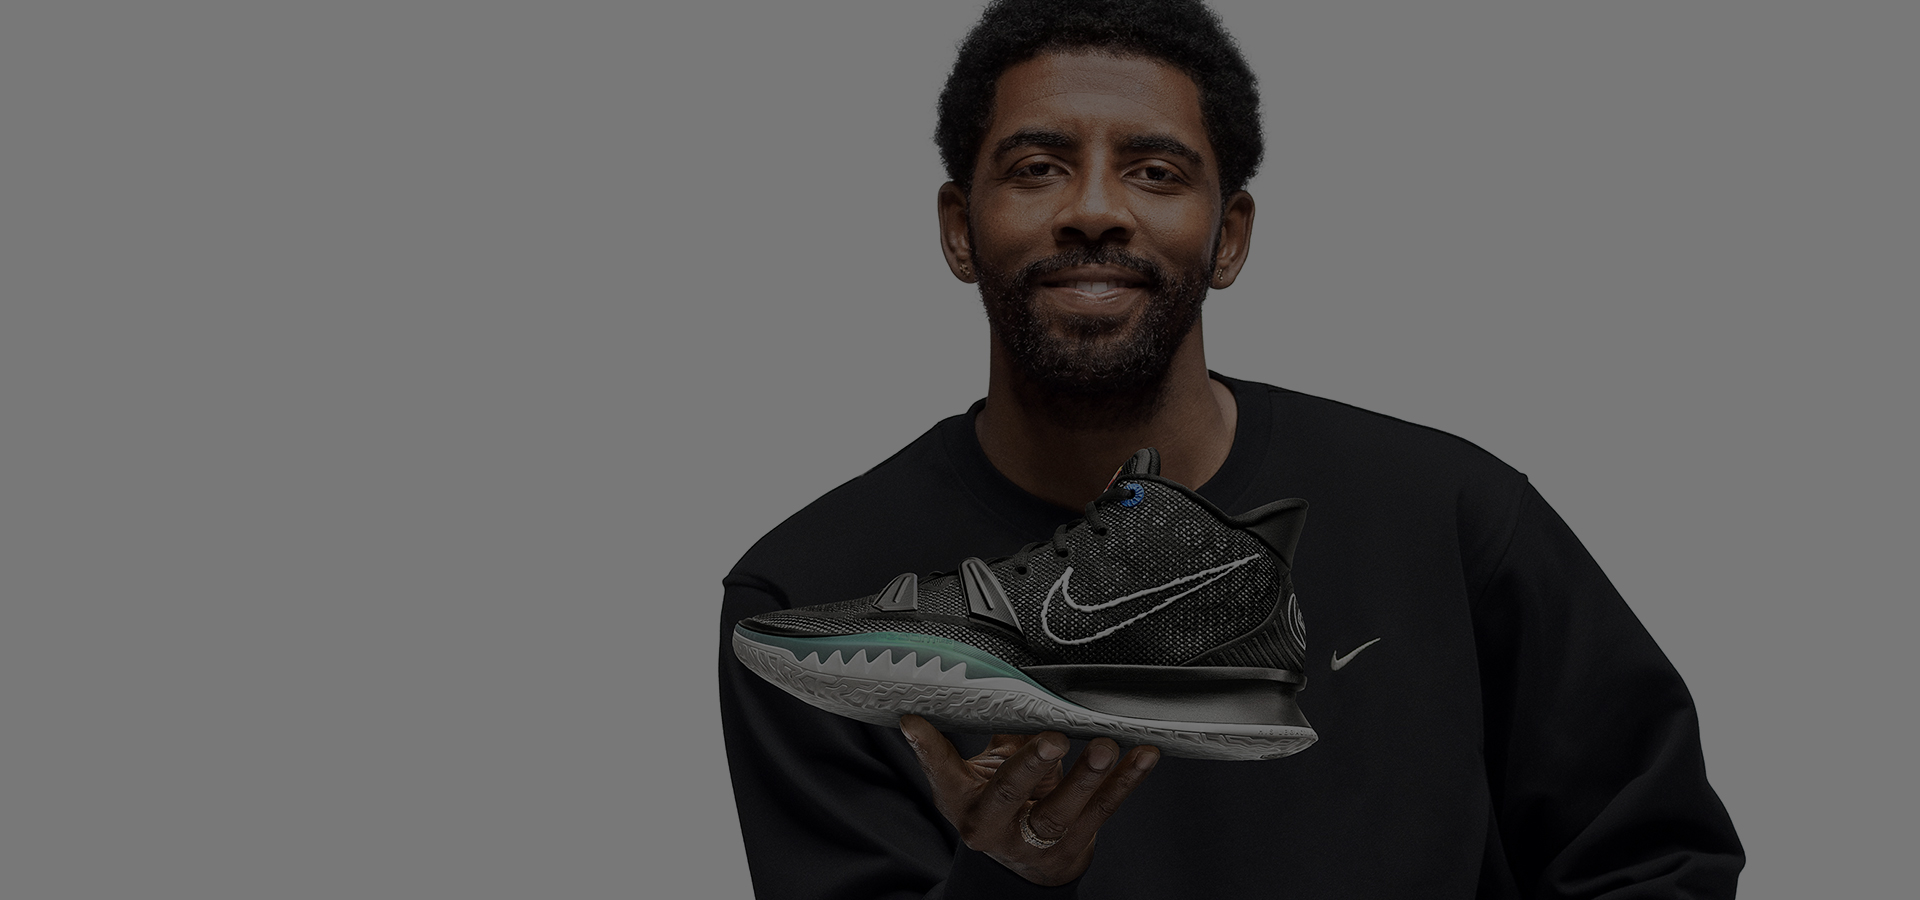 Kyrie Irving's Multifaceted Interests Lead The Way For The Nike Kyrie 7